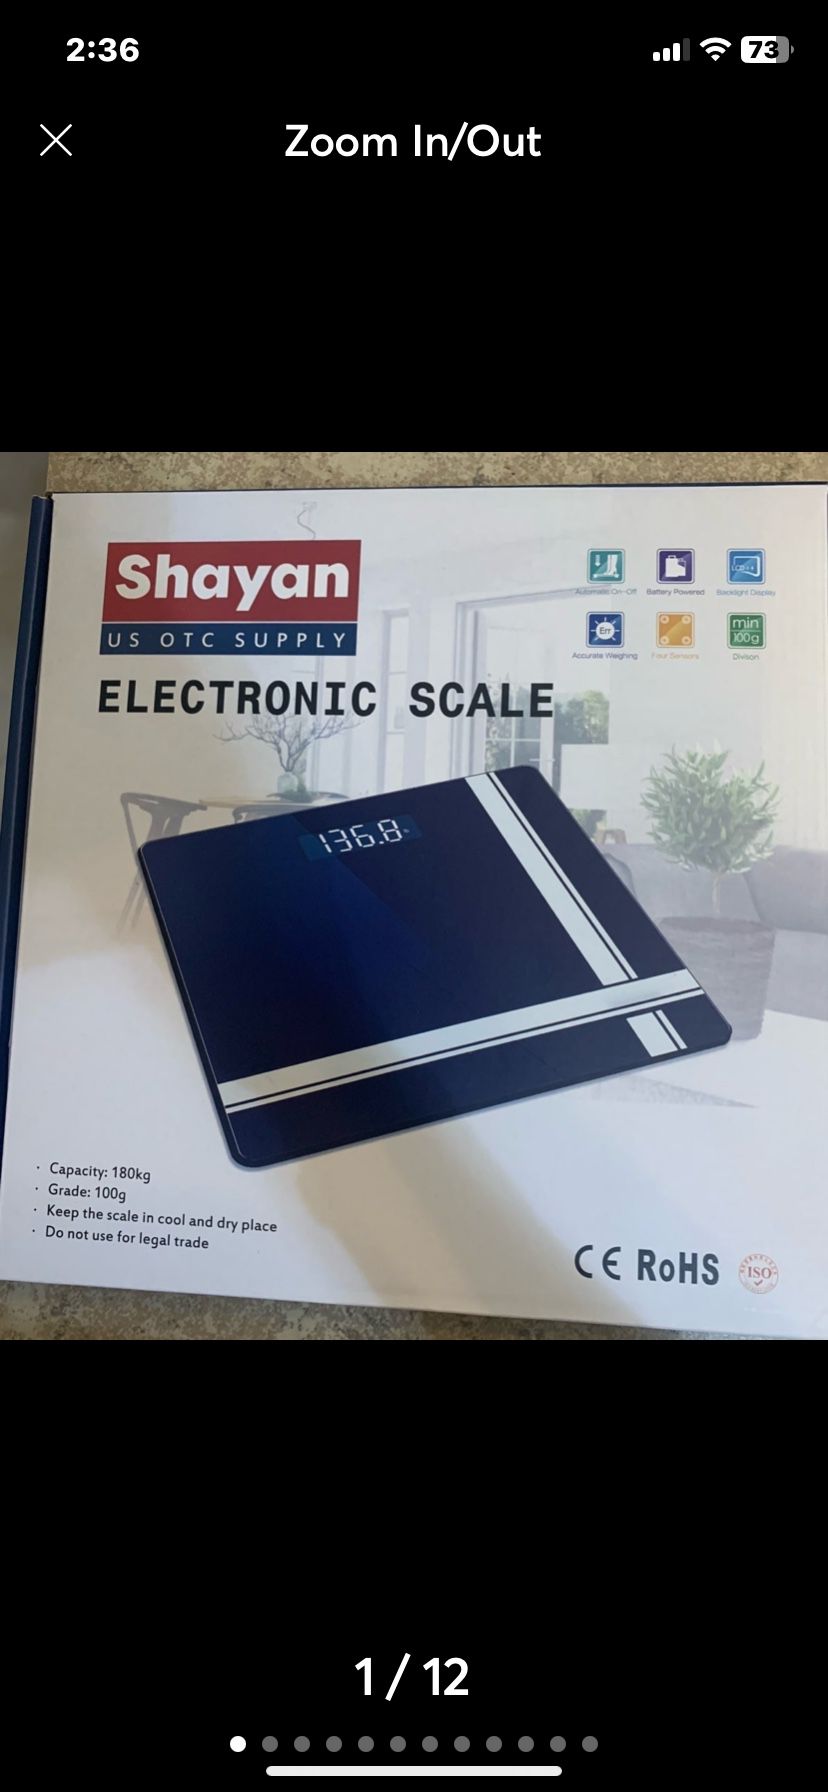 New! “Shayan” Digital Body Weight Scale,WGGE Bathroom Scale with Backlit LCD Display, Step-On Technology, High Precision Measurements with Toughened G